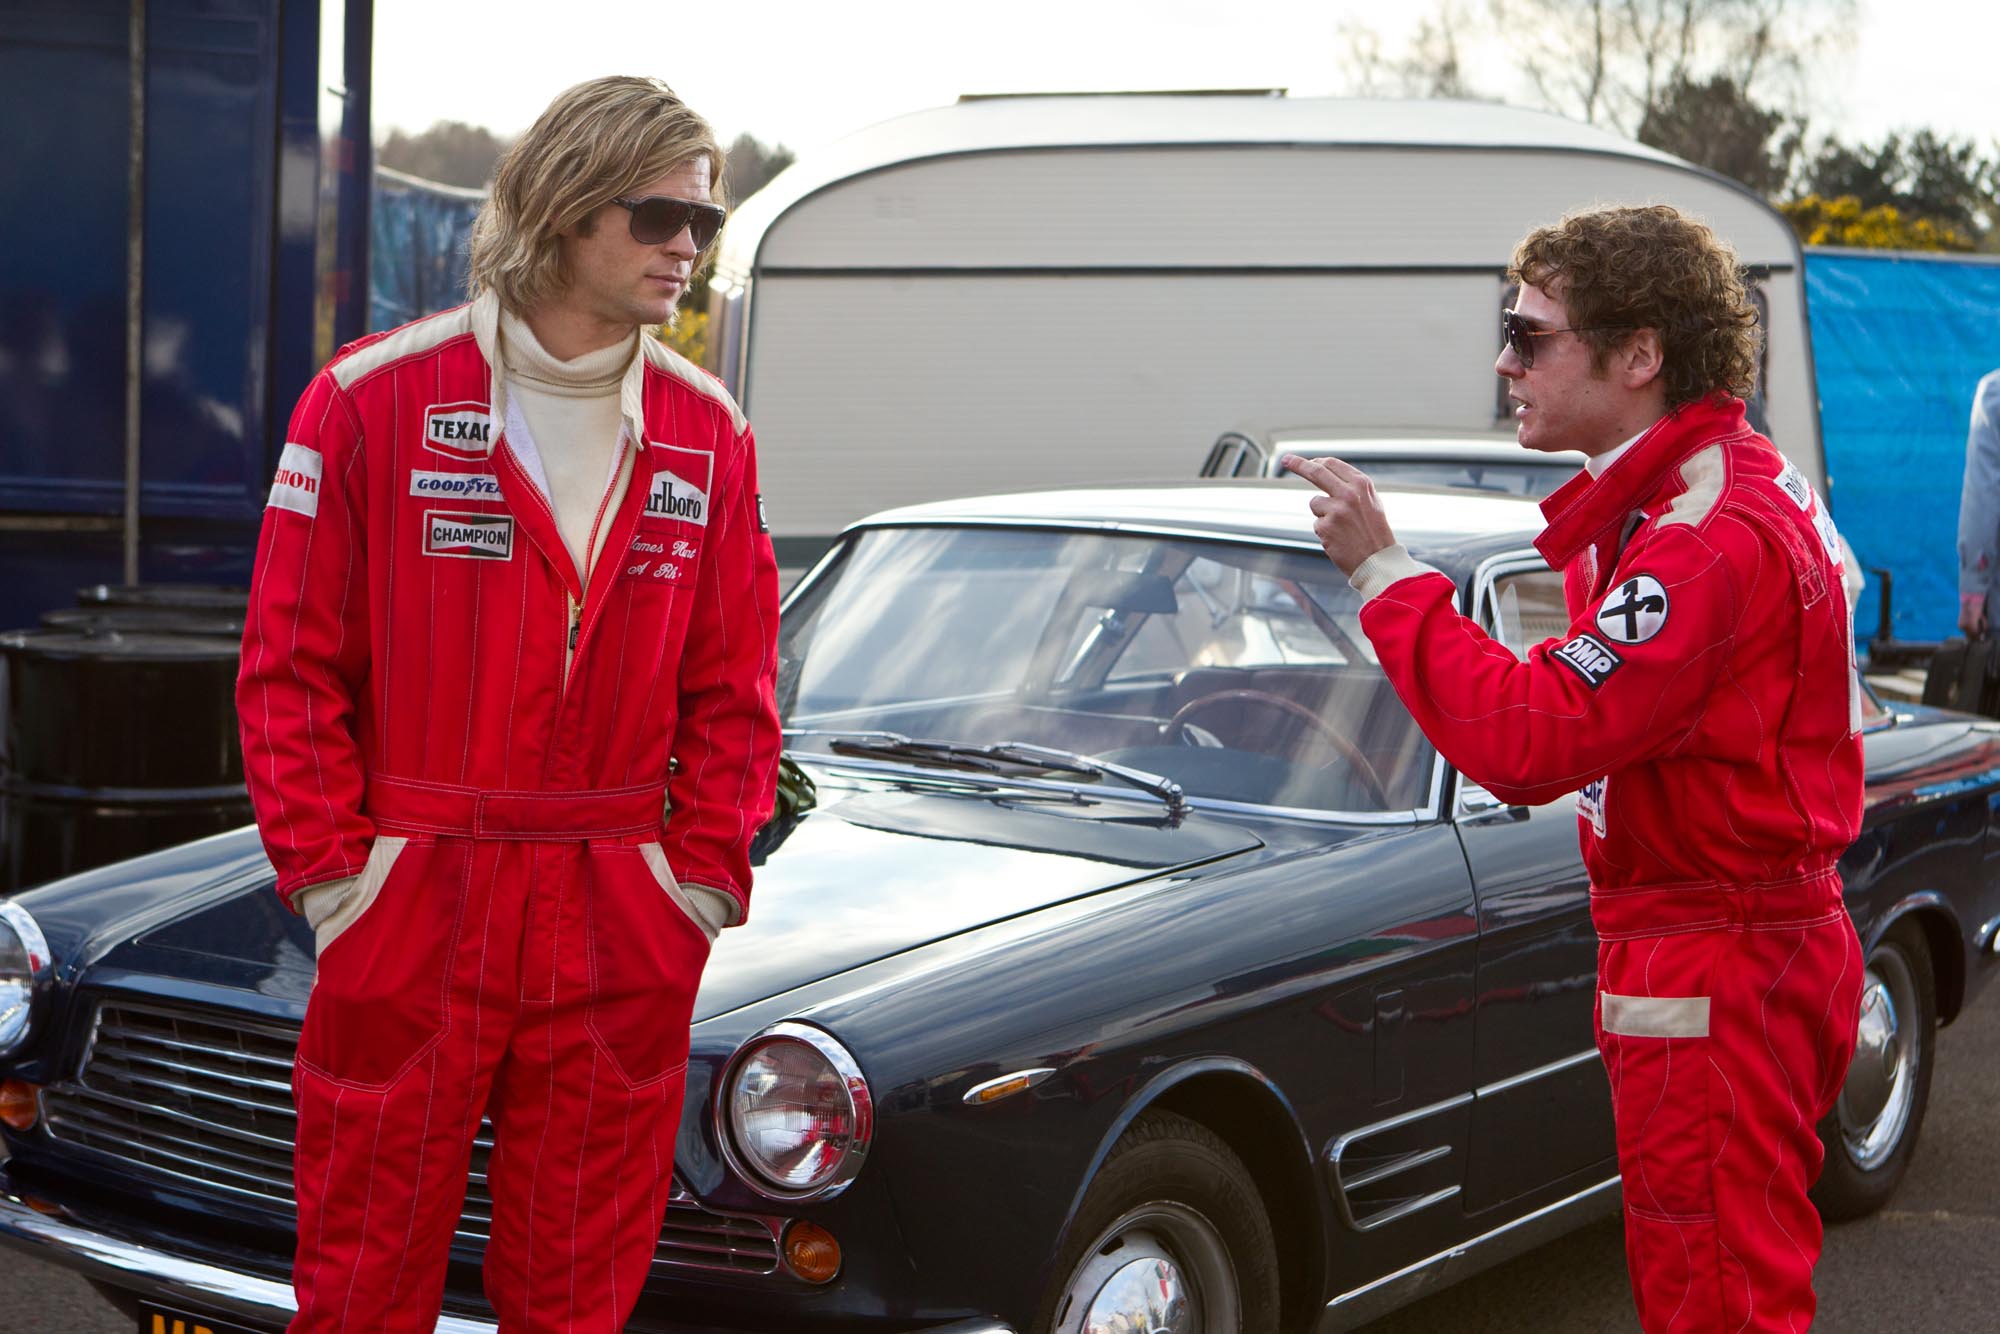 HD desktop wallpaper of two actors portraying rival racecar drivers from the movie Rush (2013), standing by a vintage car.